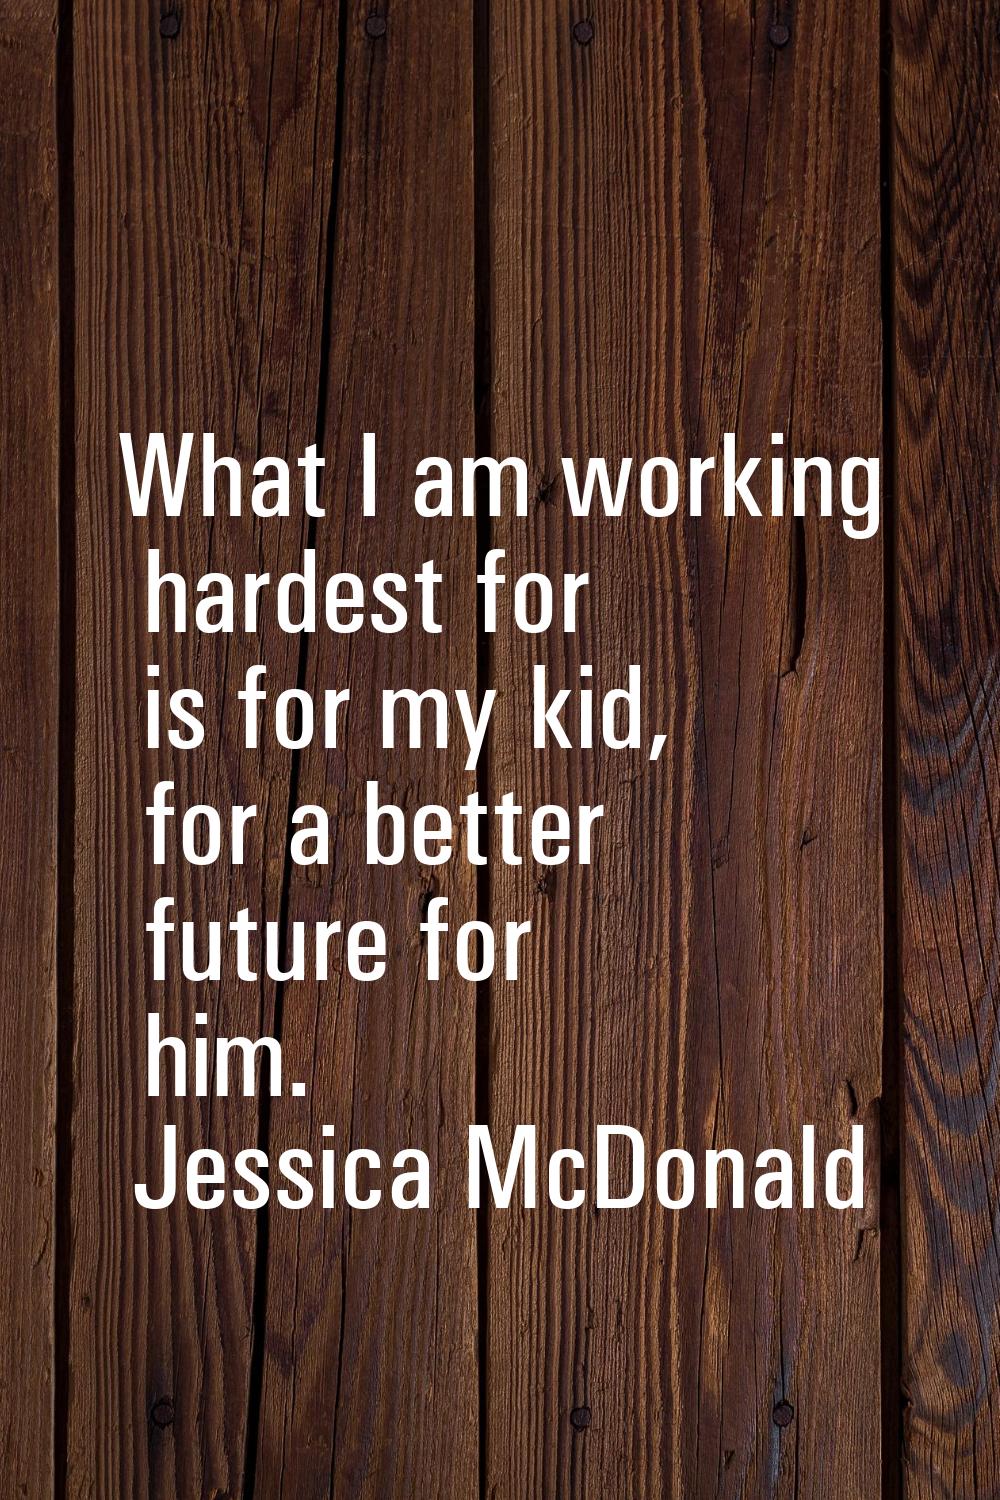 What I am working hardest for is for my kid, for a better future for him.